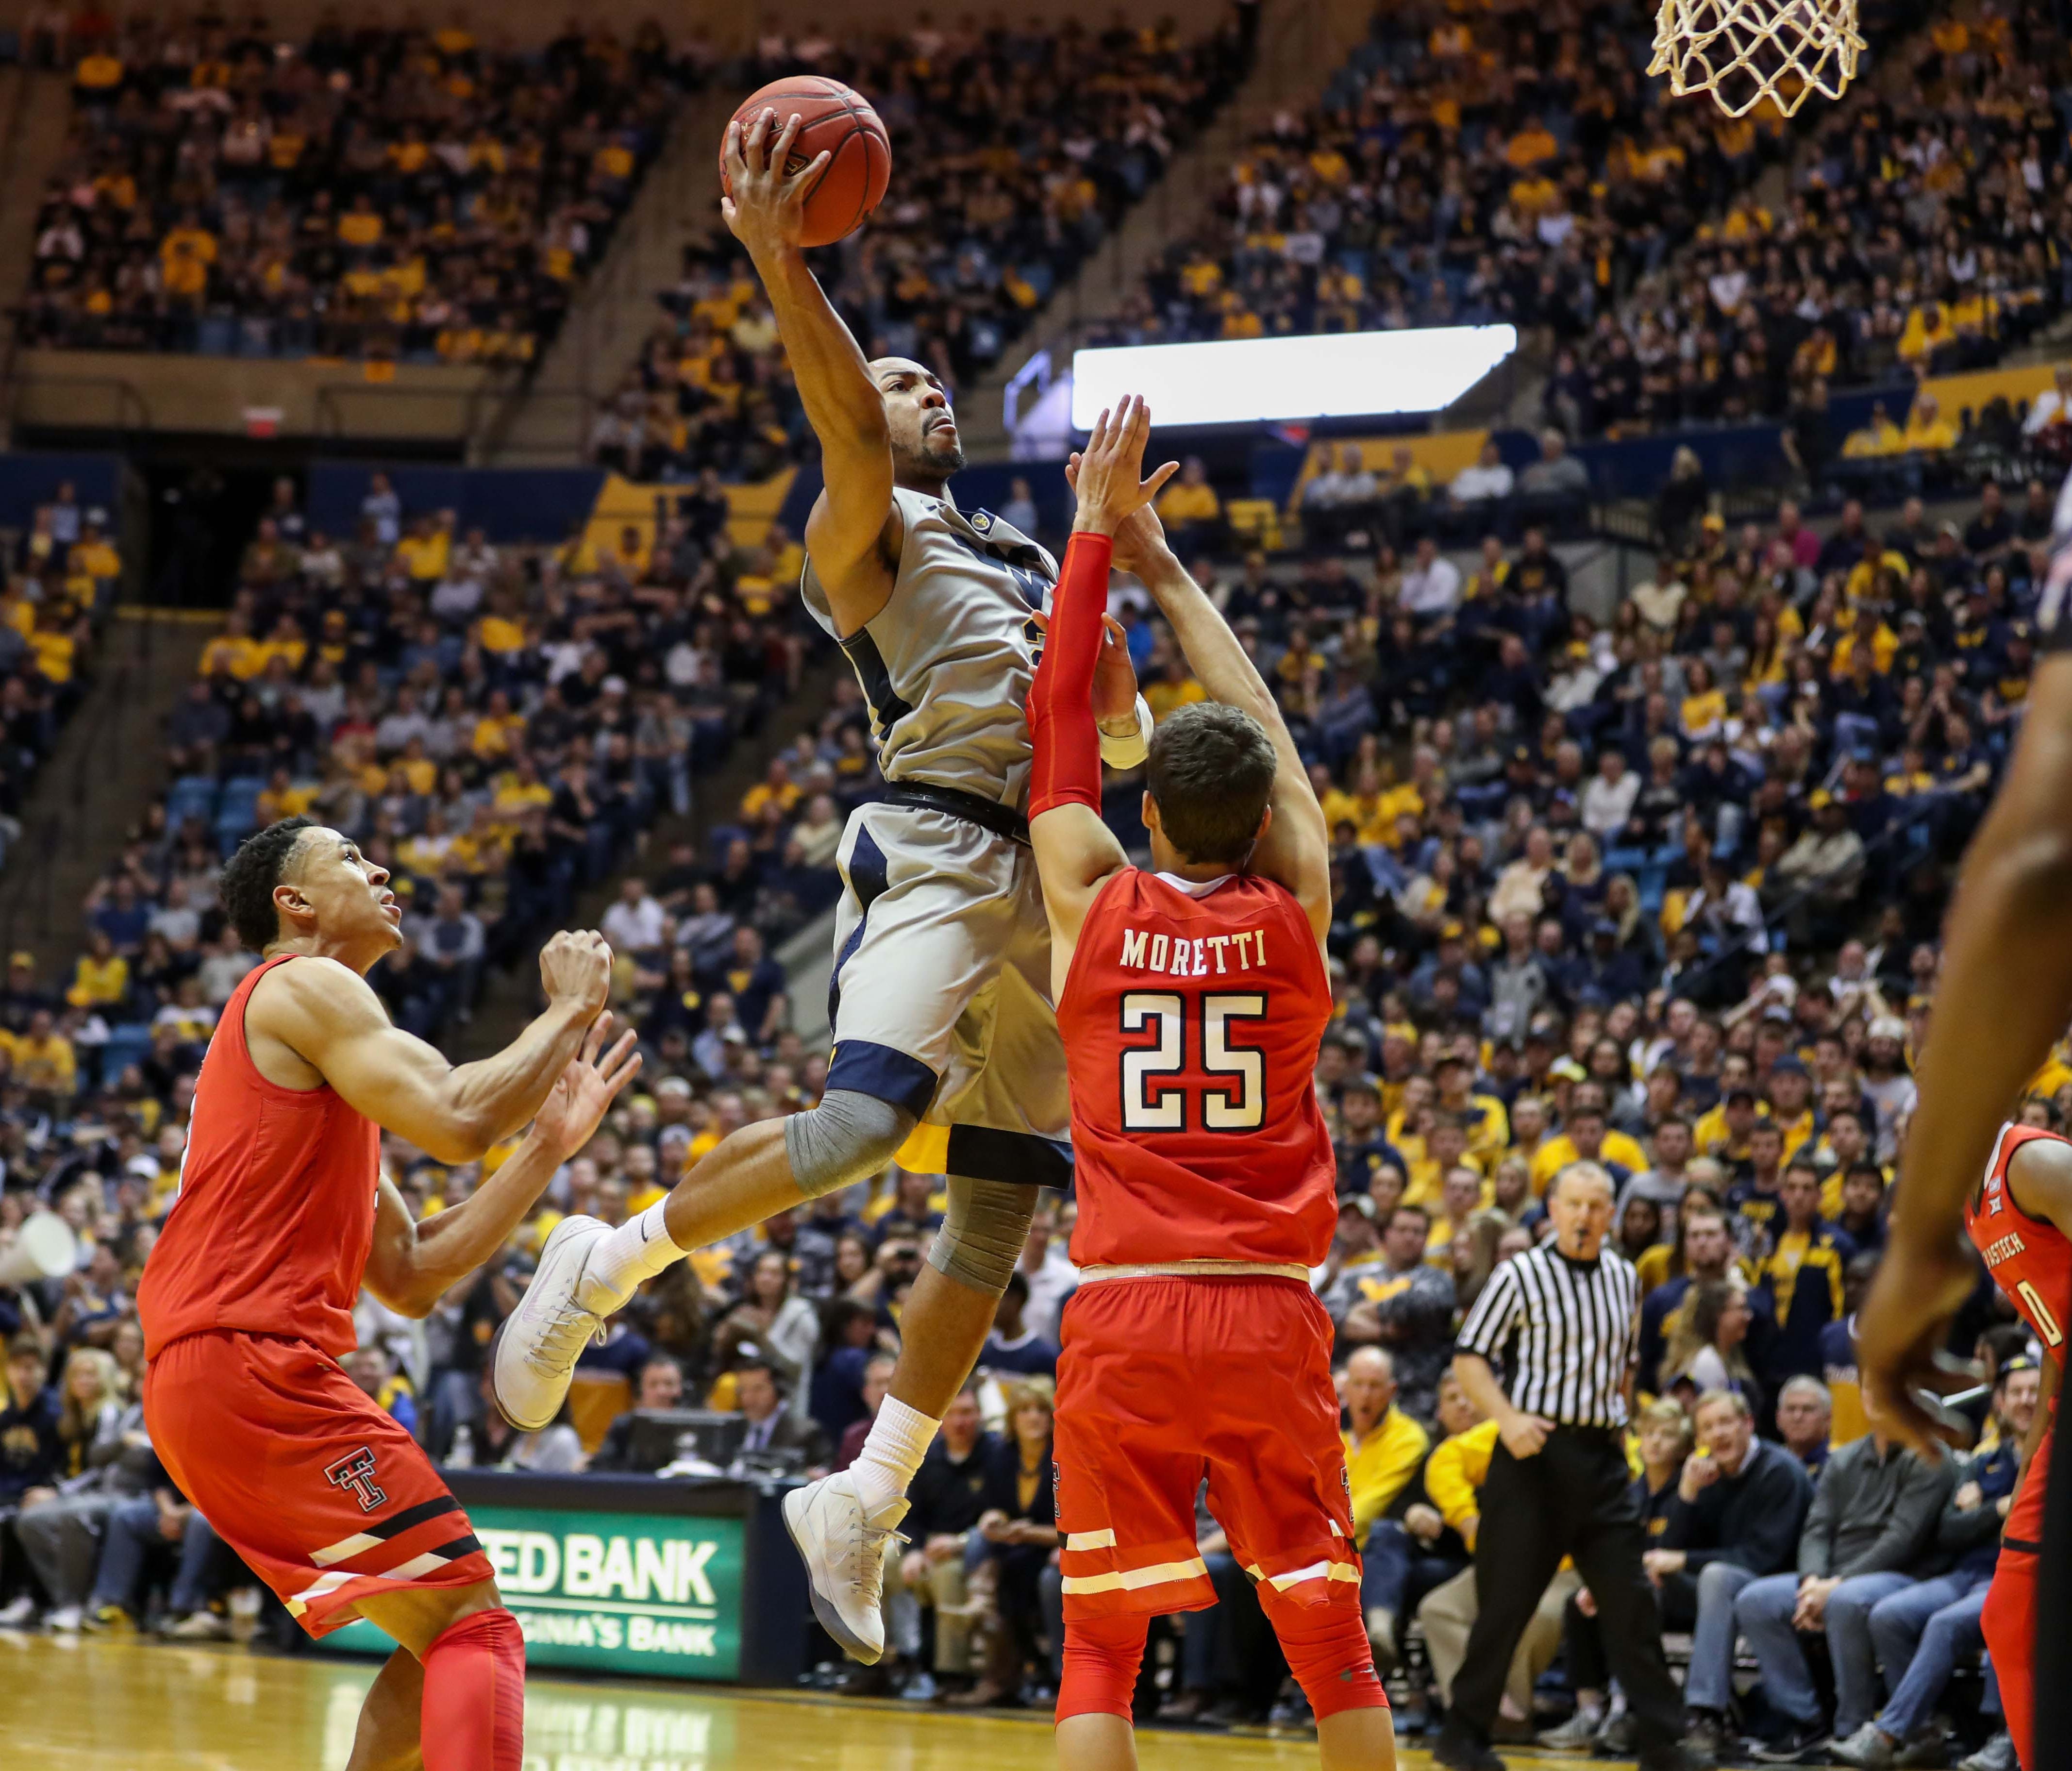 West Virginia Mountaineers guard Jevon Carter (2) shoots in the lane during the second half against the Texas Tech Red Raiders at WVU Coliseum.